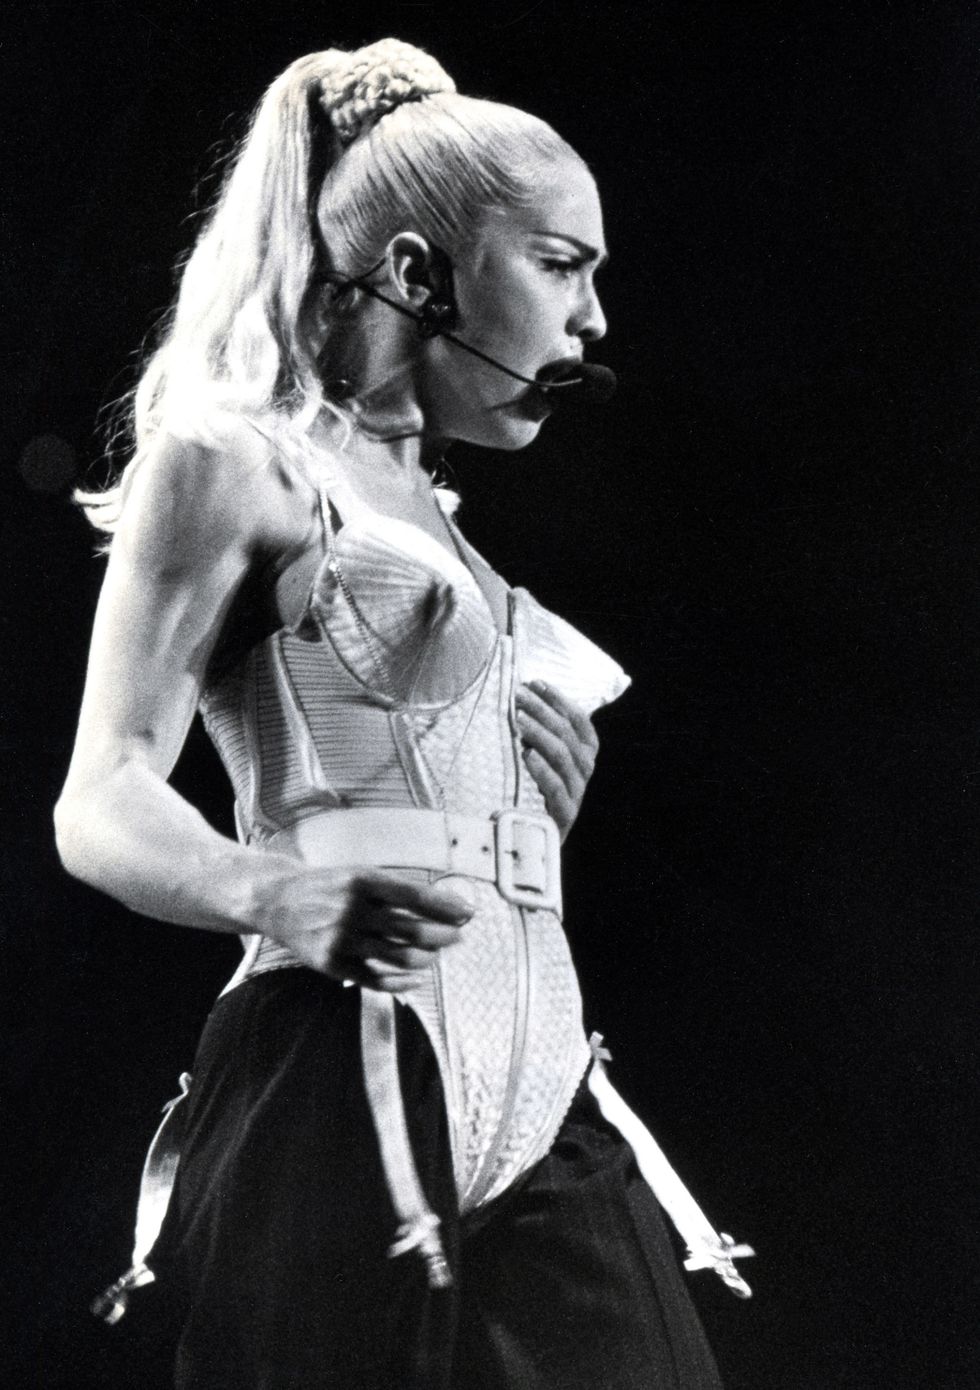 Madonna at the The Sports Arena in Los Angeles, California (Photo by Jim Smeal/WireImage)